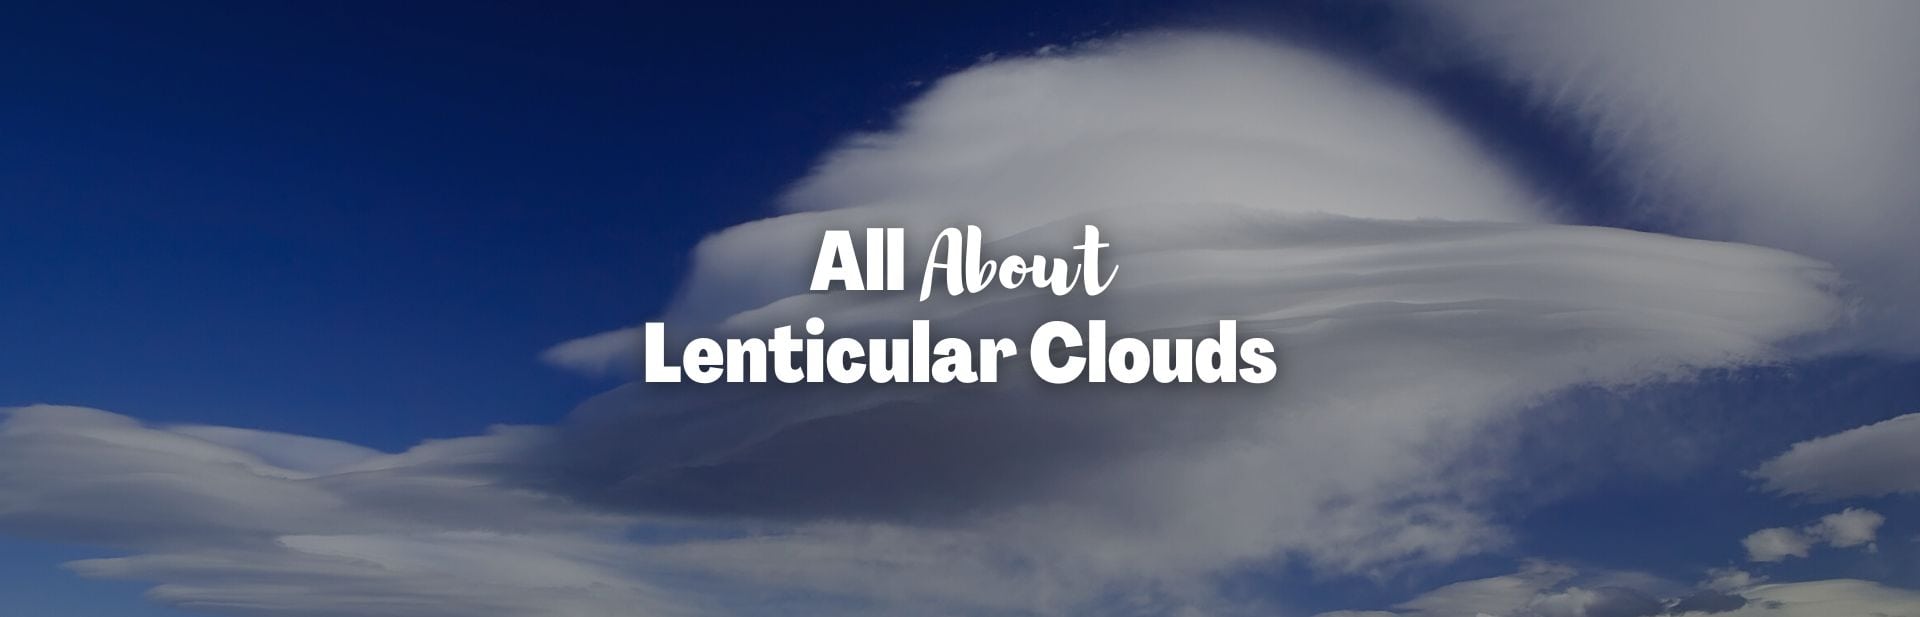 Lenticular Clouds: Why Are They Shaped Like UFOs?